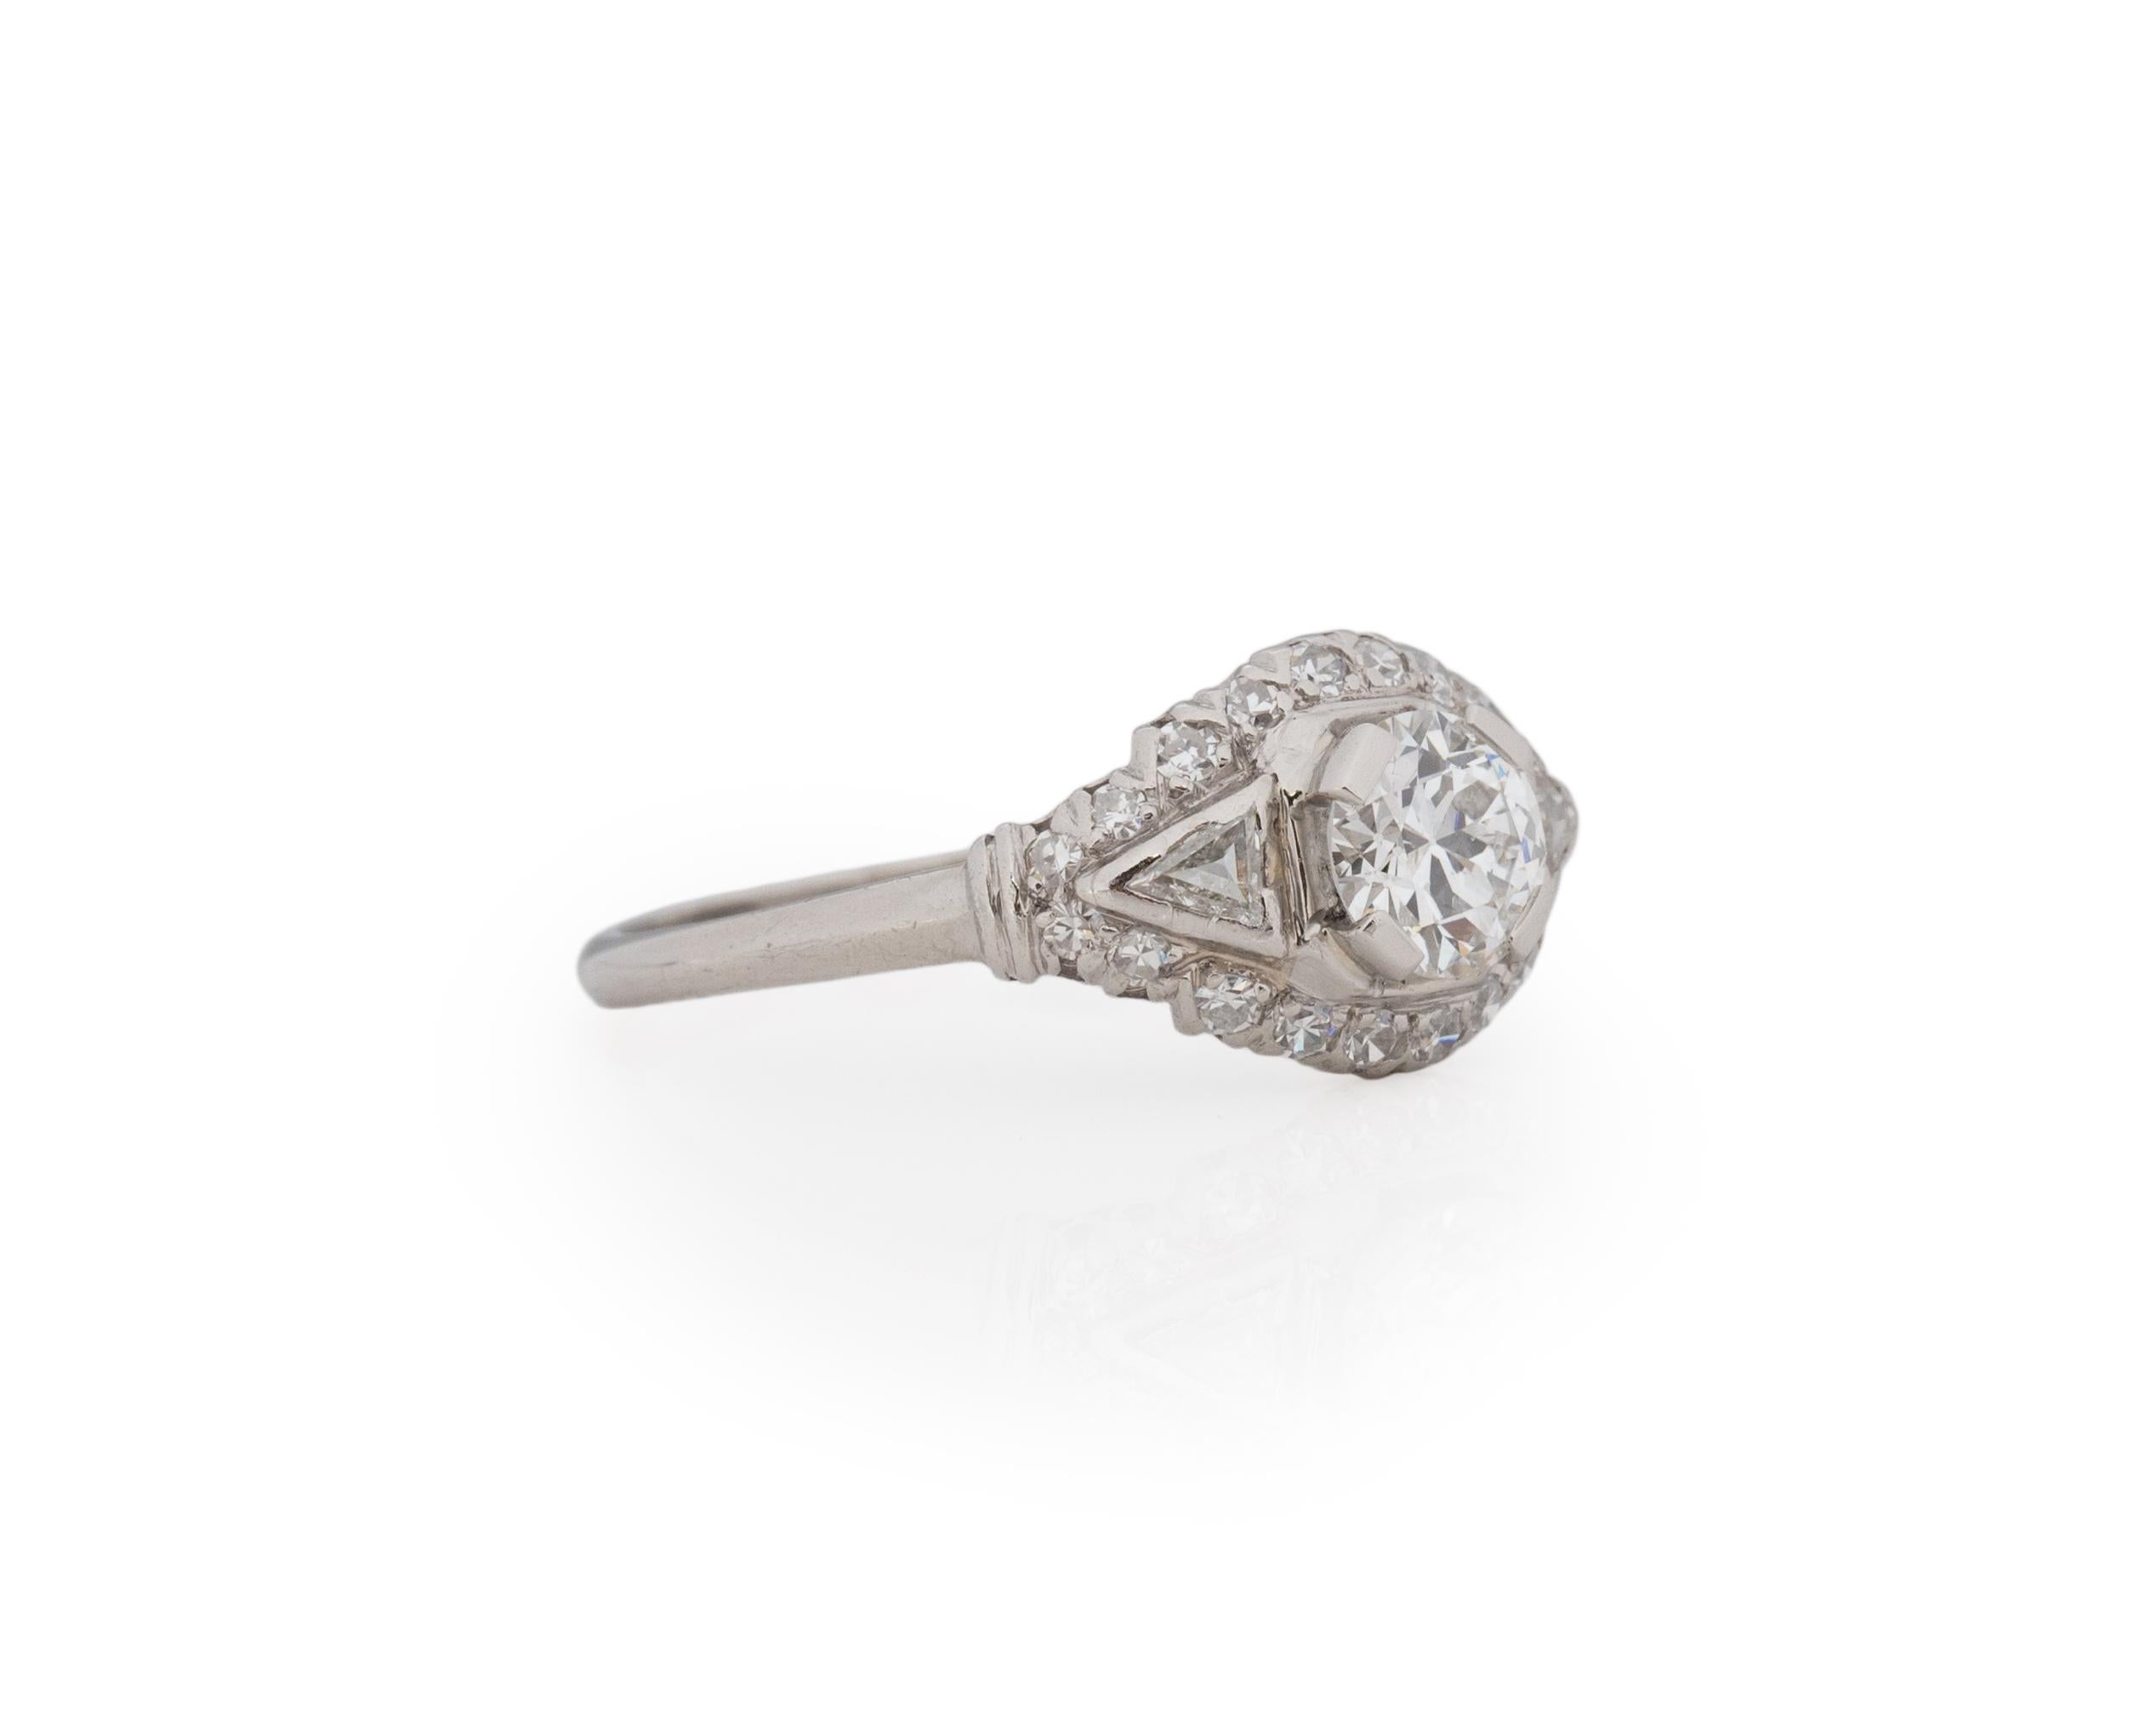 Ring Size: 9.5
Metal Type: Platinum [Hallmarked, and Tested]
Weight: 4.0 grams

Diamond Details:
GIA REPORT #: 5222455946
Weight: .83ct
Cut: Old European brilliant
Color: F
Clarity: SI2
Measurements: 6.21mm x 6.11mm x 3.68mm

Finger to Top of Stone